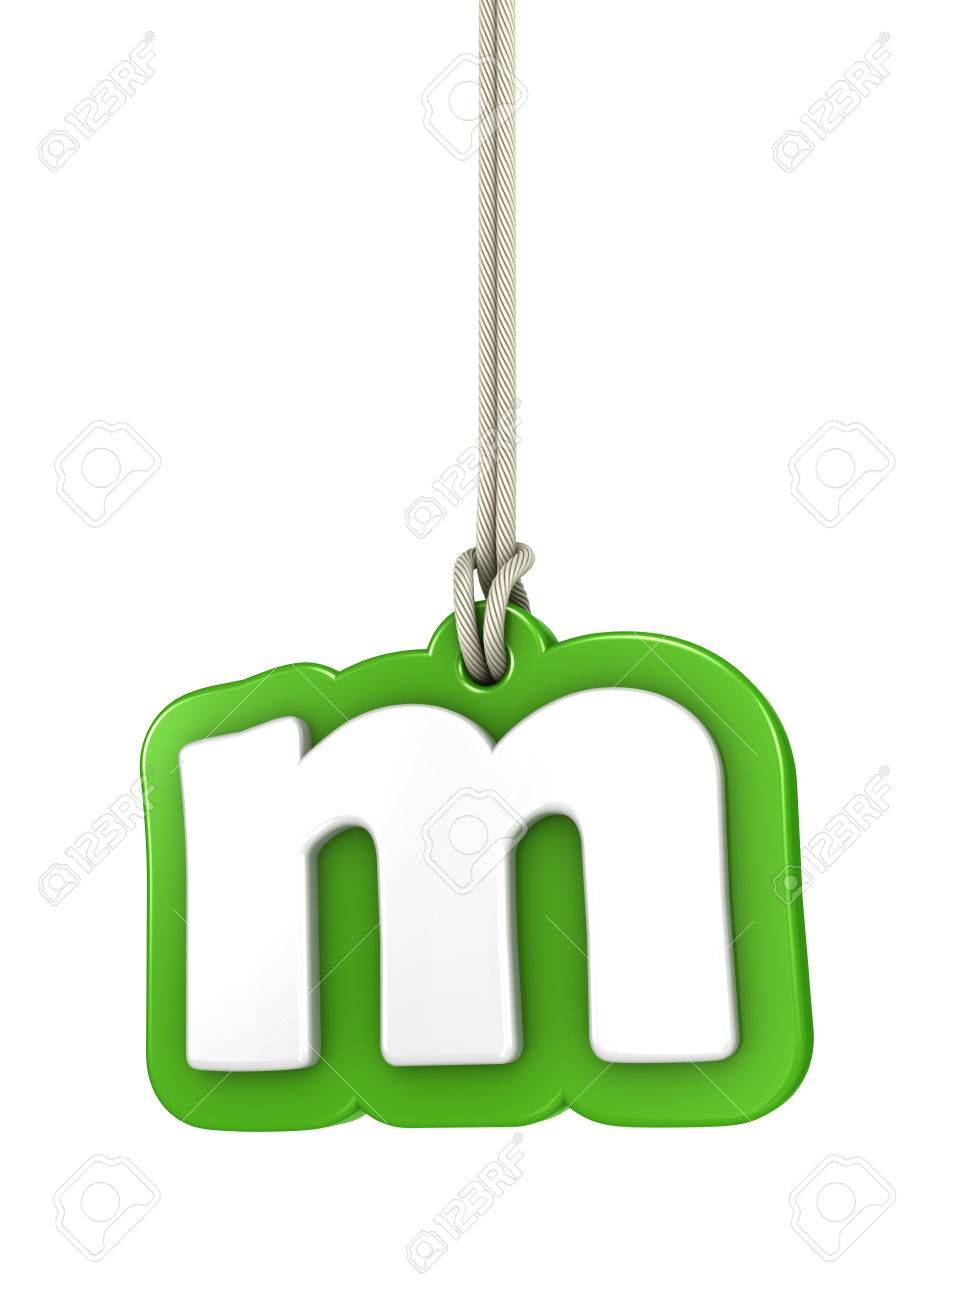 Green lowercase letter m hanging